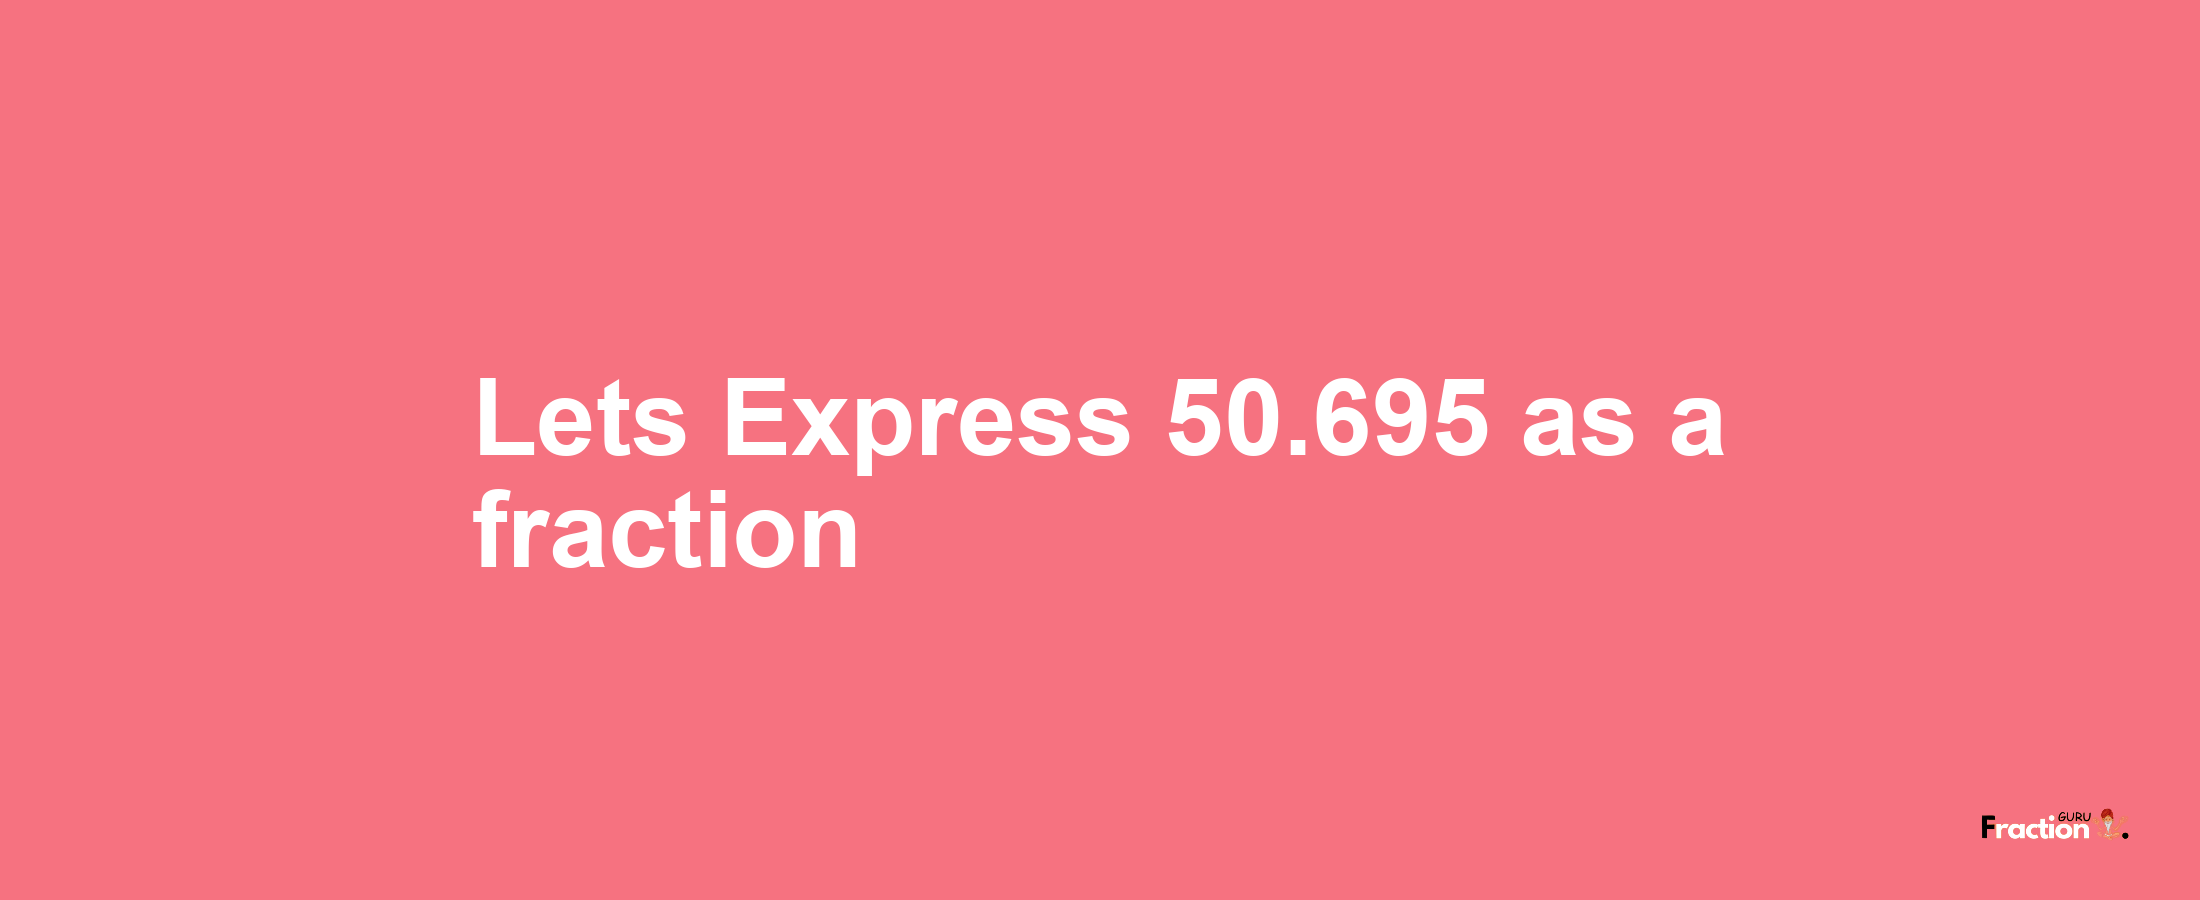 Lets Express 50.695 as afraction